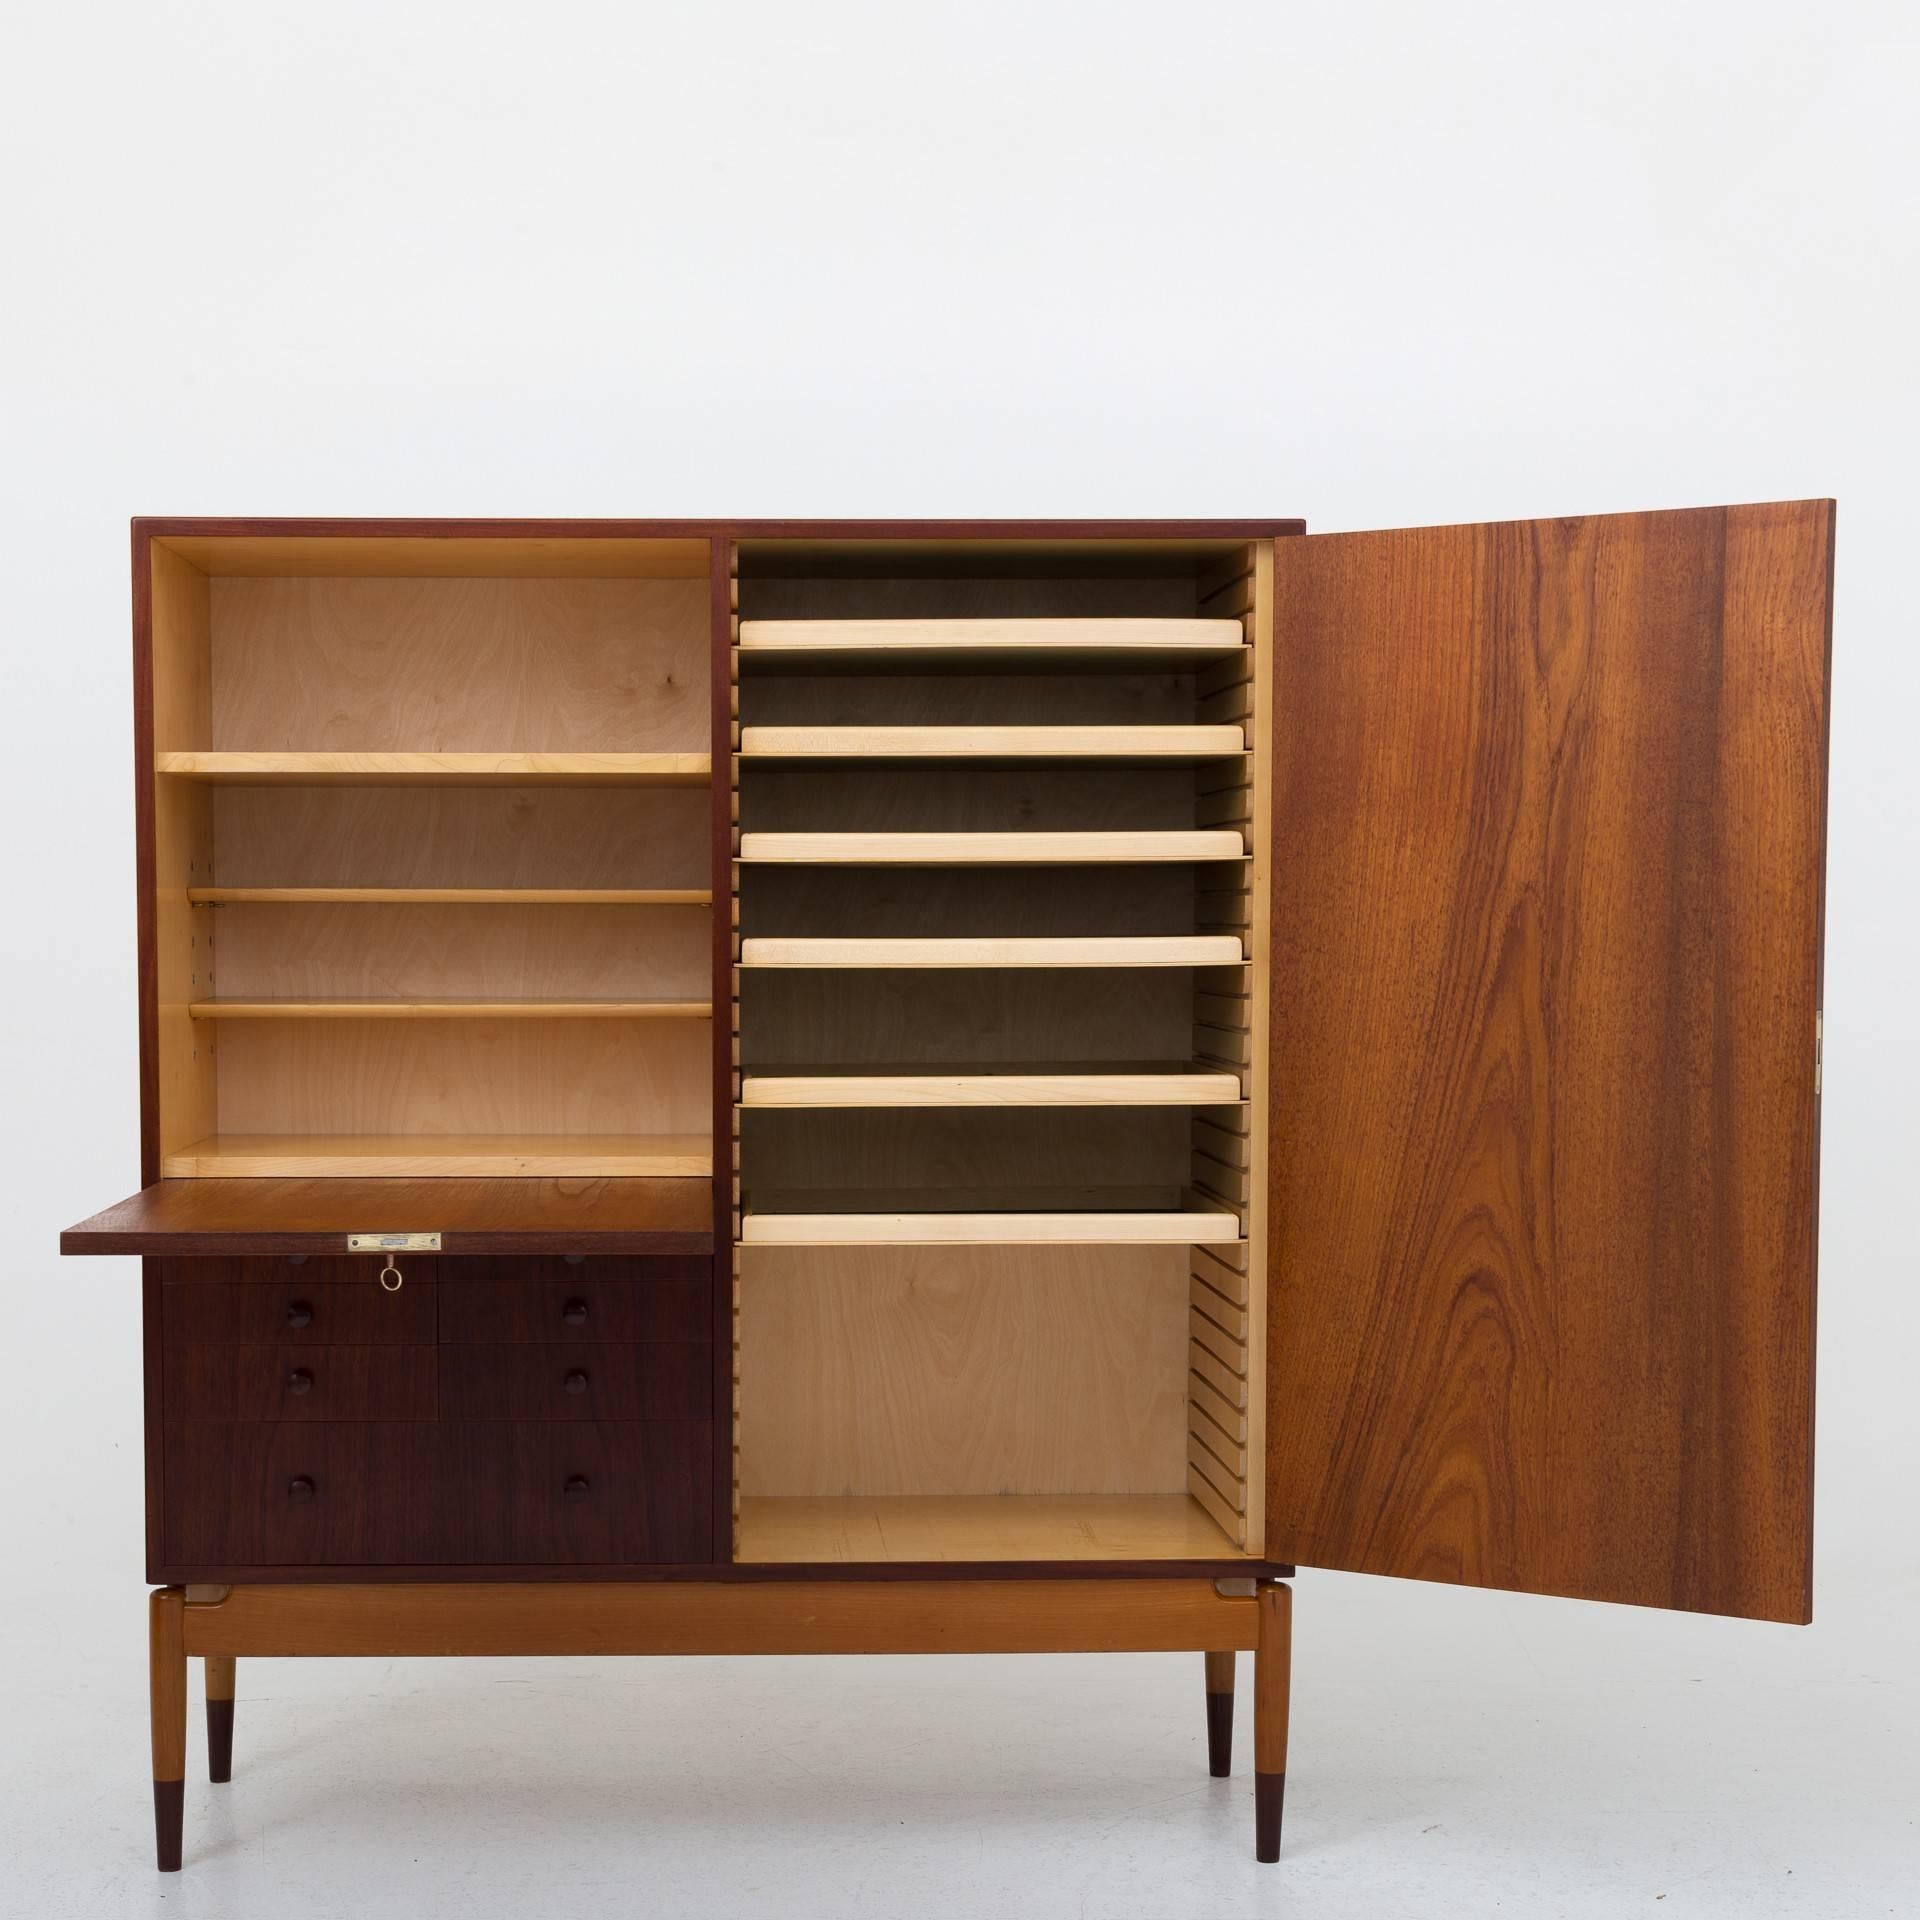 Cabinet in teak, base/legs in beech, front with eight drawers. Designed by Finn Juhl and produced by Søren Willadsen, Vejen.